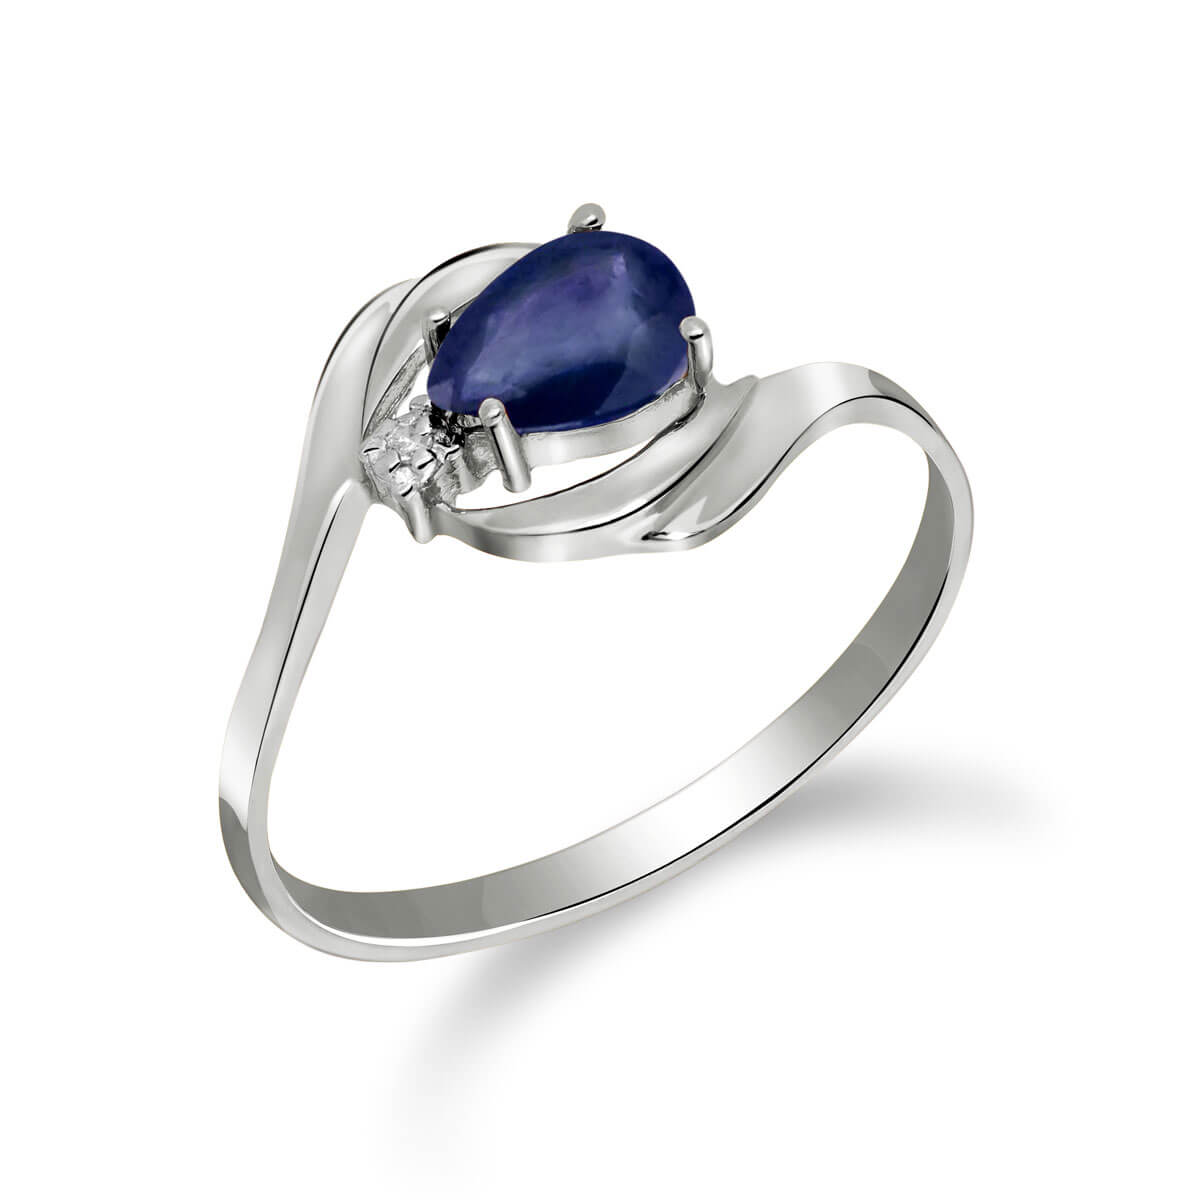 Sapphire & Diamond Flare Ring in 9ct White Gold